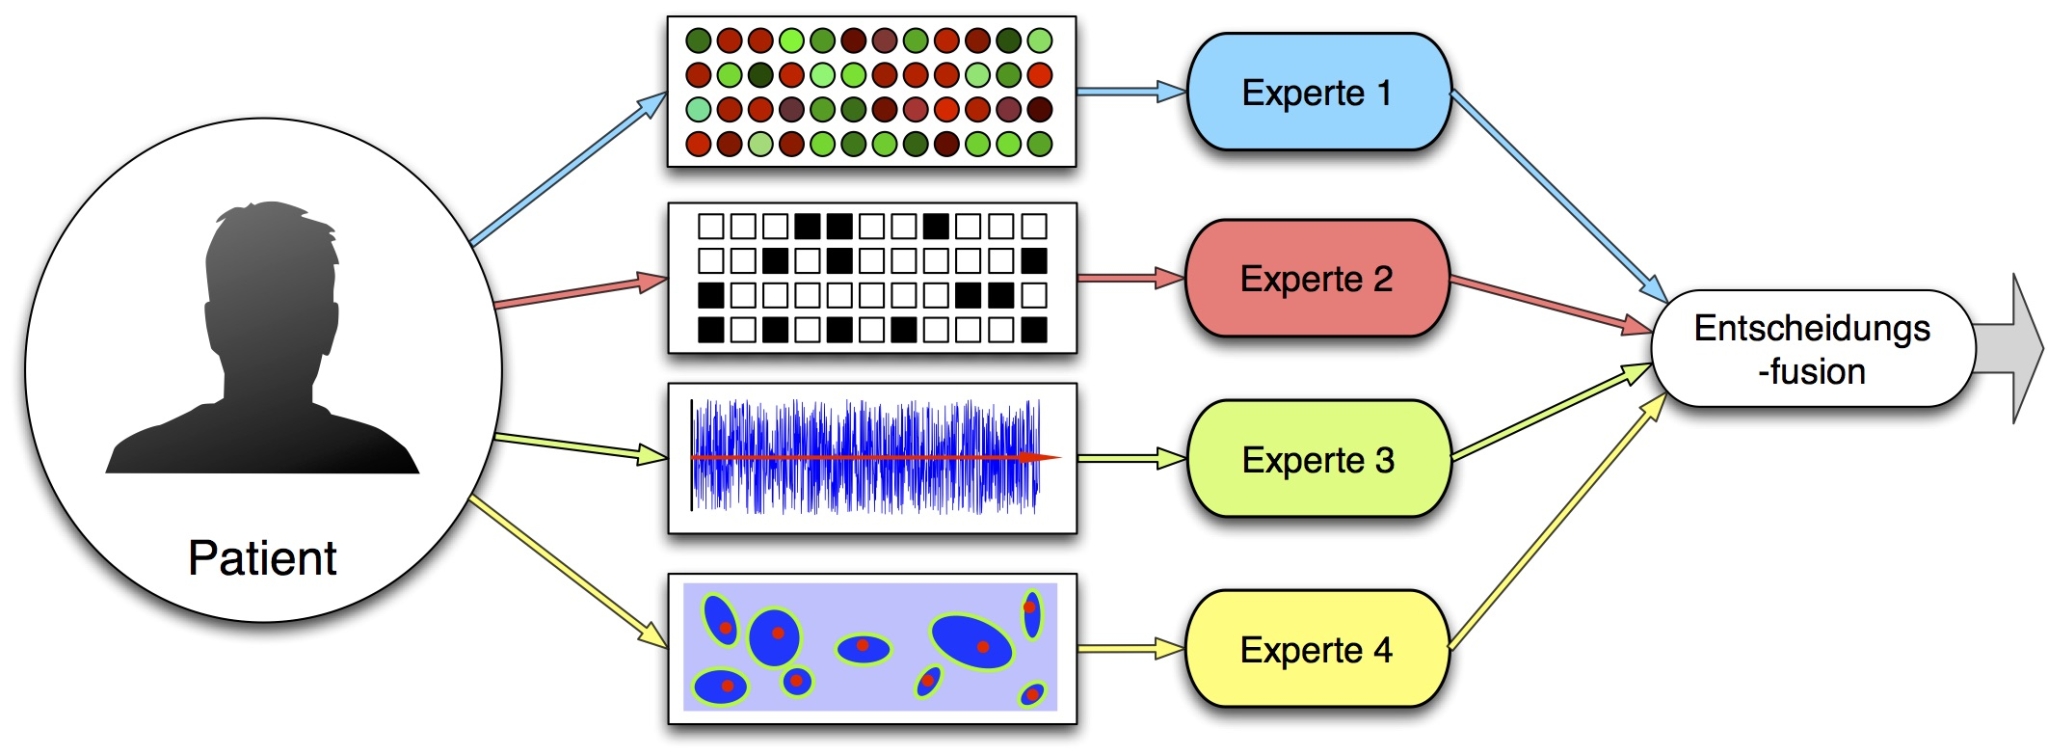 Schematic showing how data of a patient from different sources such as imaging and molecular diagnostics along with expert comments are combined and used for making a decision.